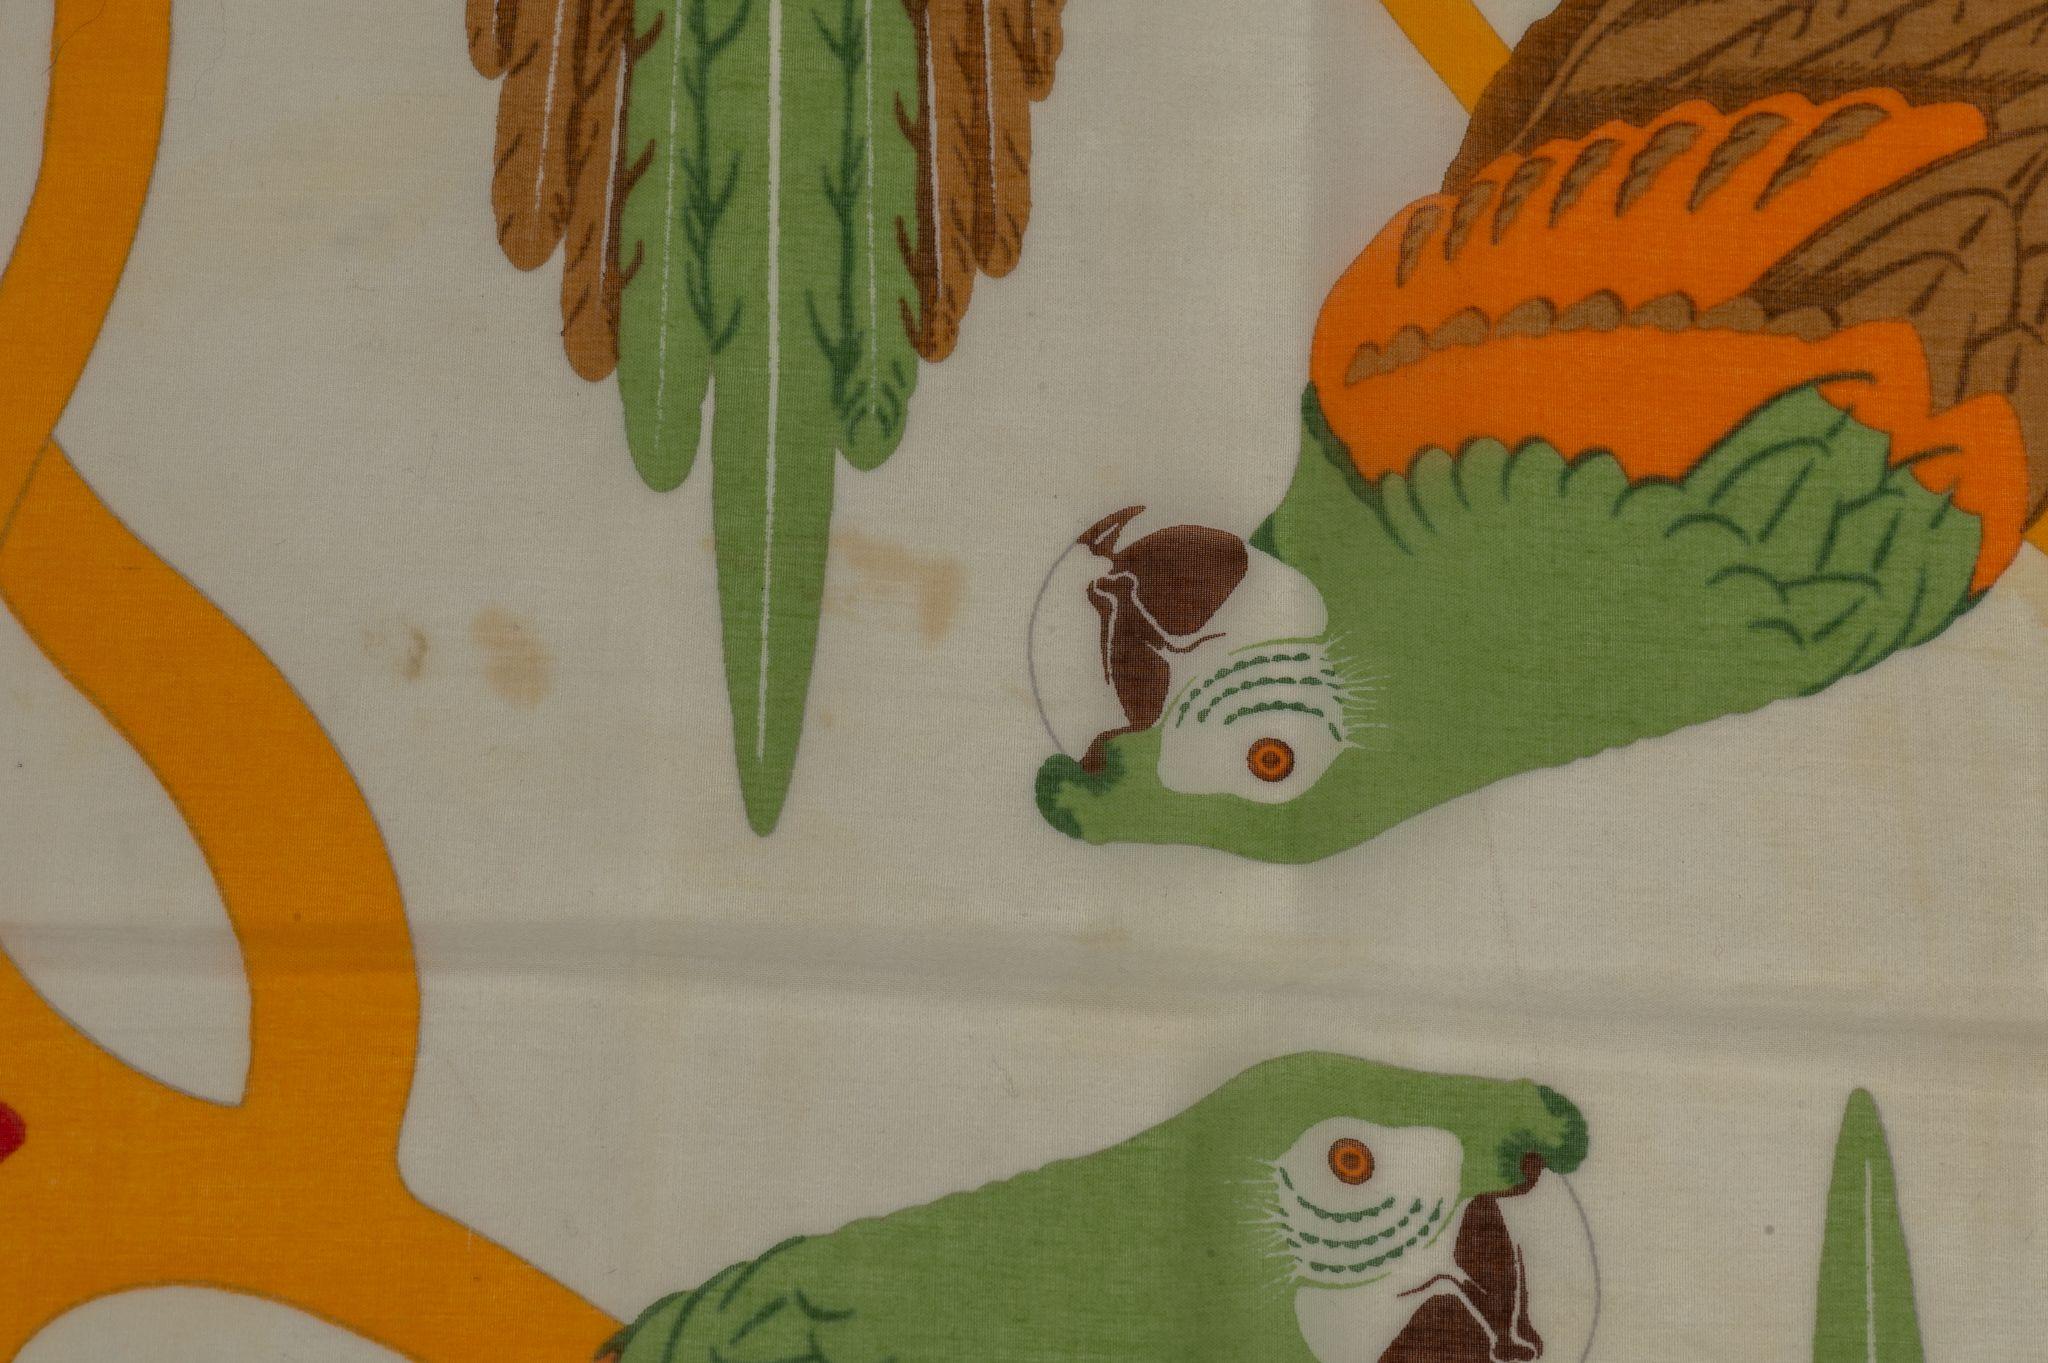 Hermès Green Parrots Cotton Sarong. The pattern features several parrots in the color green, brown and orange. The frame is red and has rolled edges. Piece is in very good condition with a stain. Please see pictures.